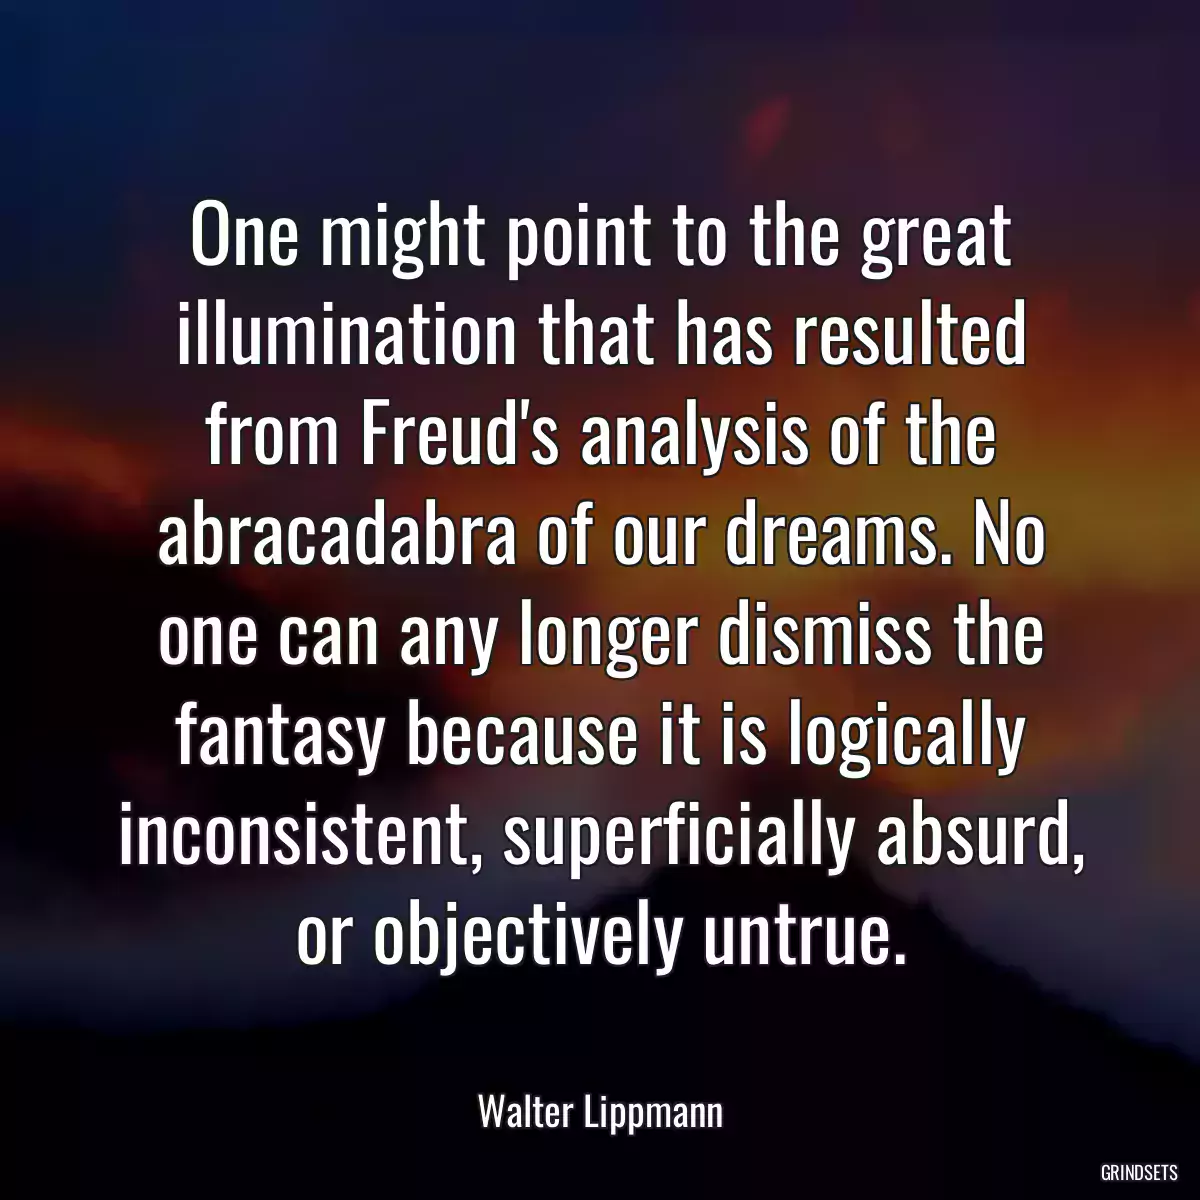 One might point to the great illumination that has resulted from Freud\'s analysis of the abracadabra of our dreams. No one can any longer dismiss the fantasy because it is logically inconsistent, superficially absurd, or objectively untrue.